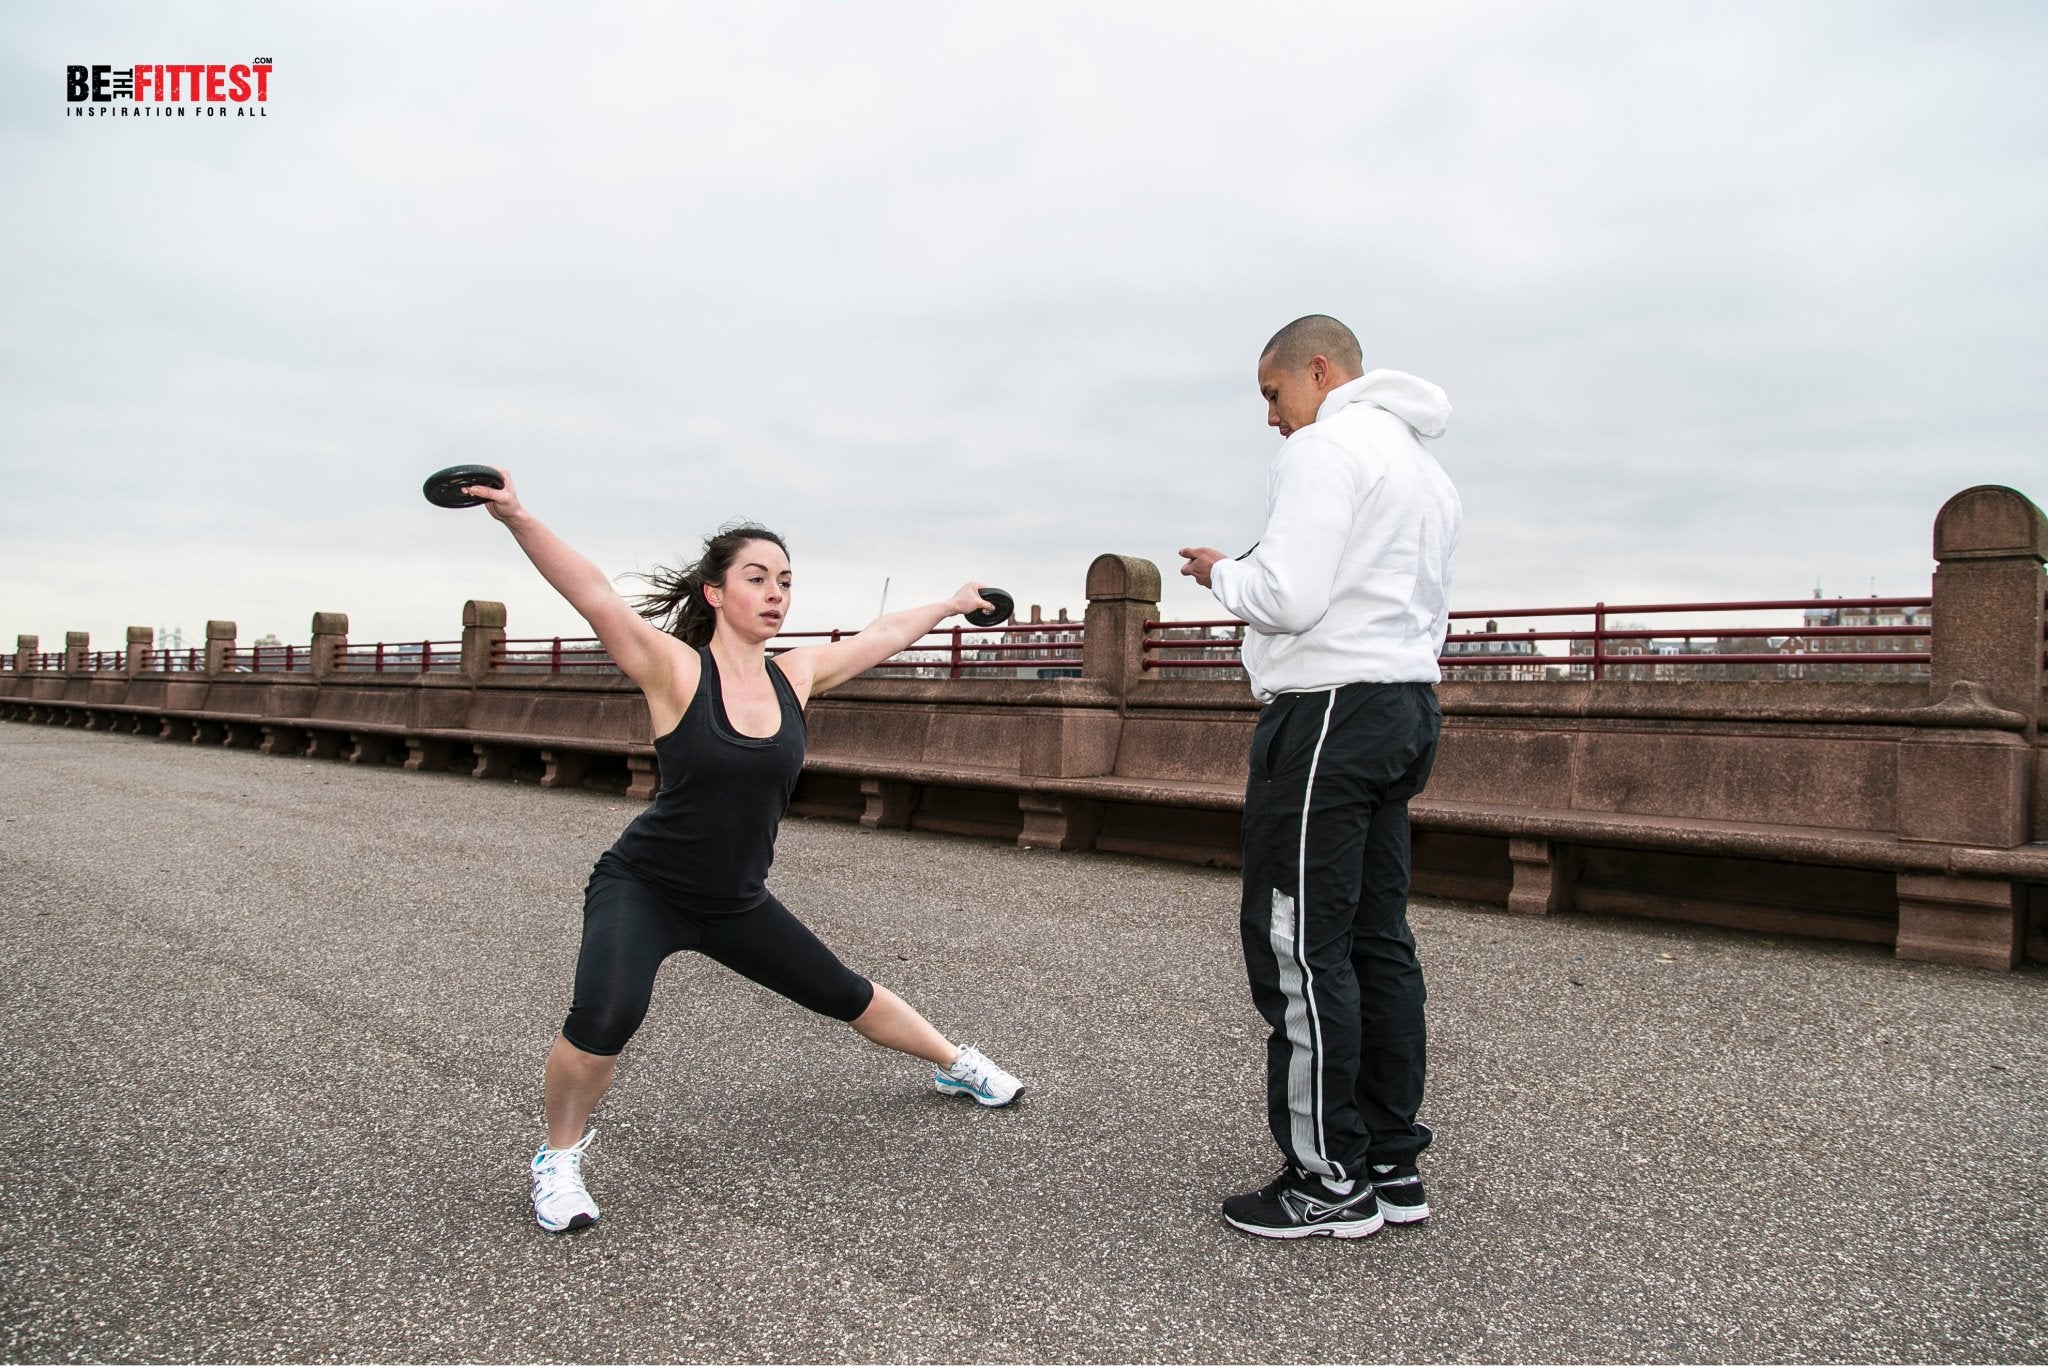 London-based personal trainer Brennant in action